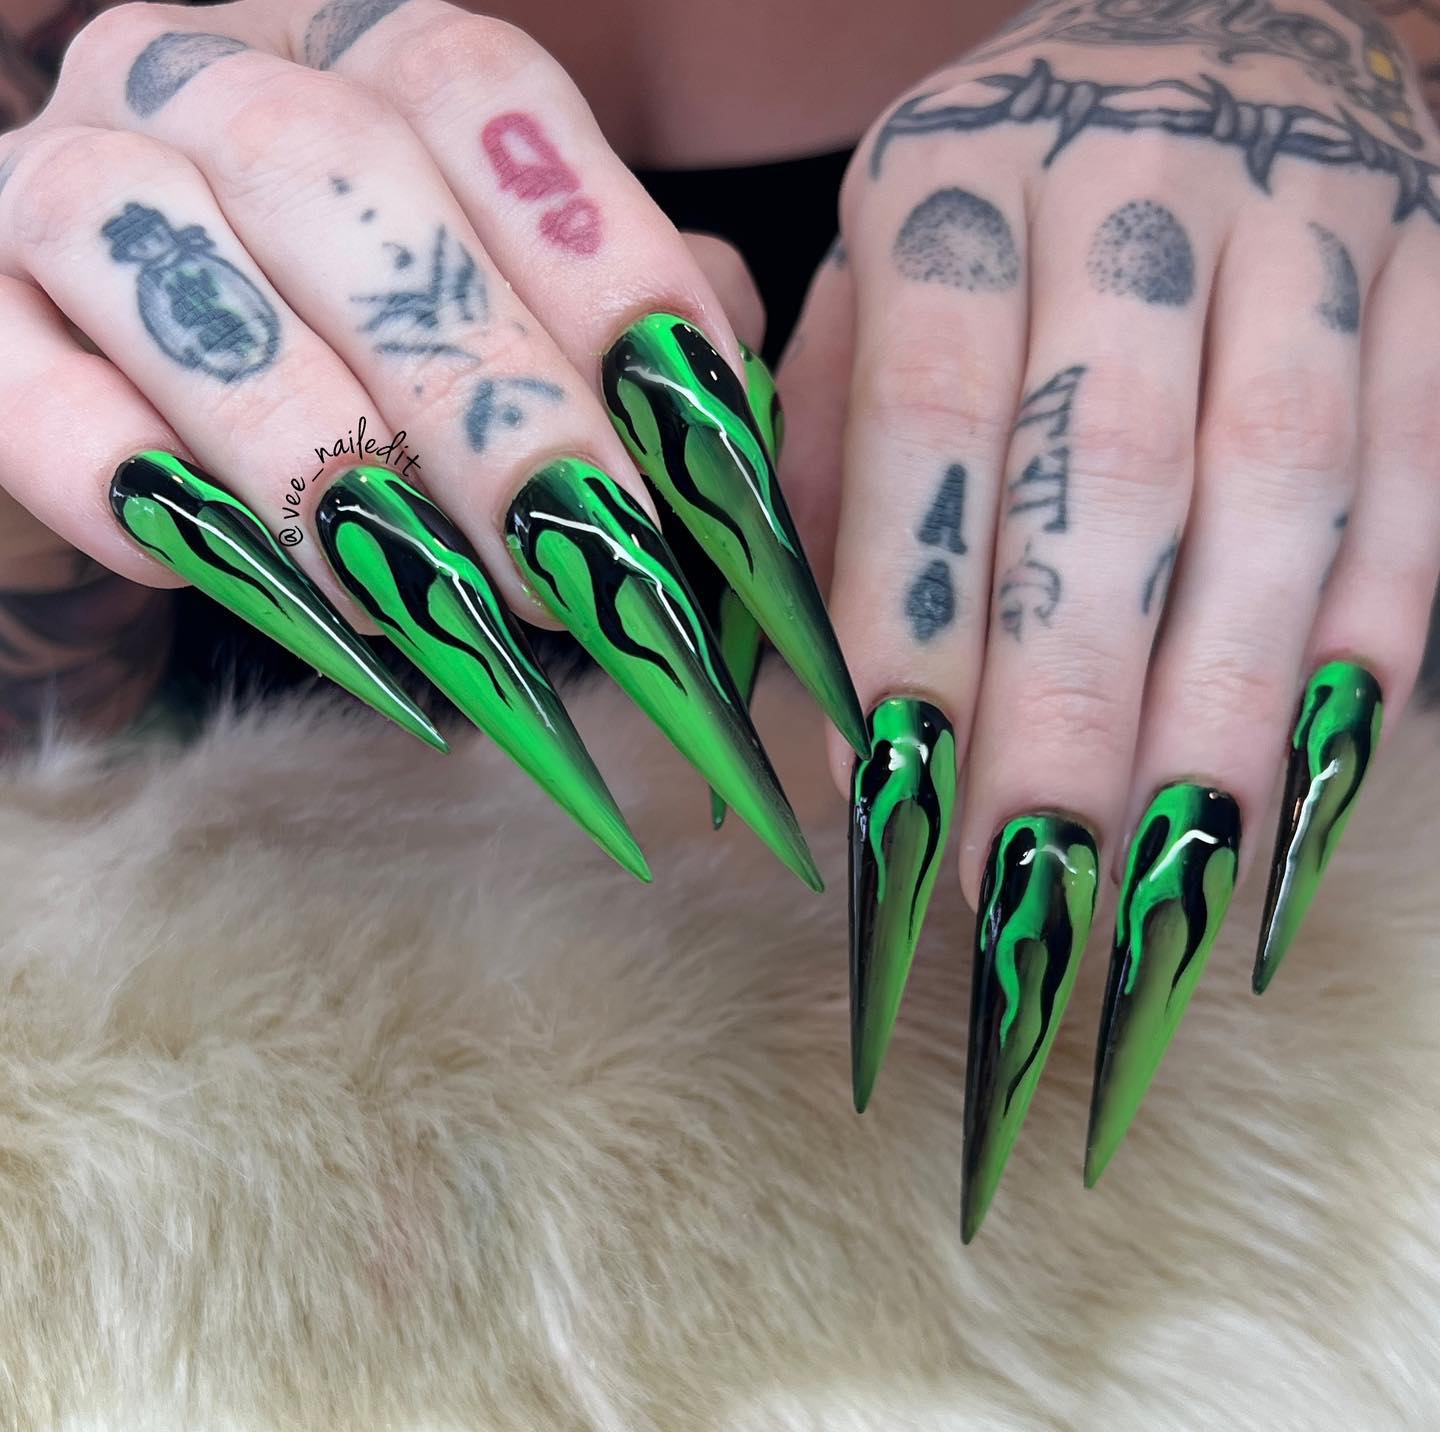 Green and black is a color combo that looks so strong and bold. The combo also symbolizes vitality and growth. For your each nail, apply green nail polish to half of it and the other one black. To give a bolder effect, apply your flame with opposite colors.